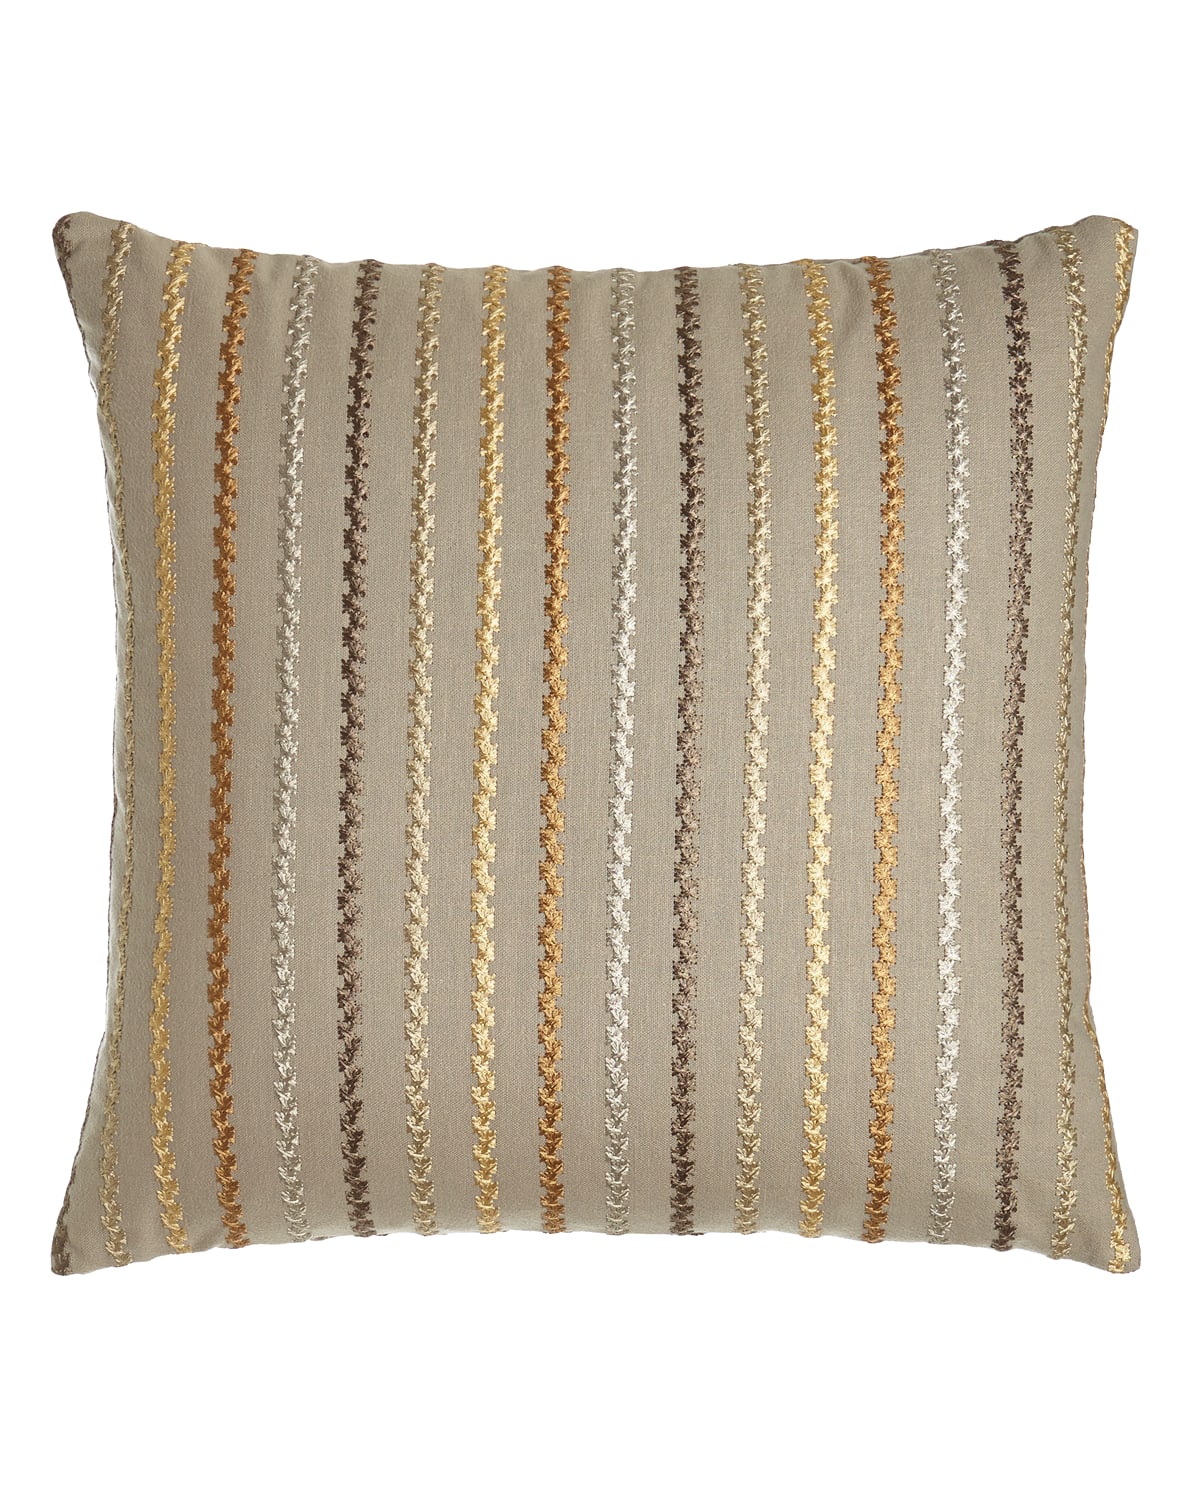 Image Square Feathers D'Or Stripes Pillow, 22"Sq.